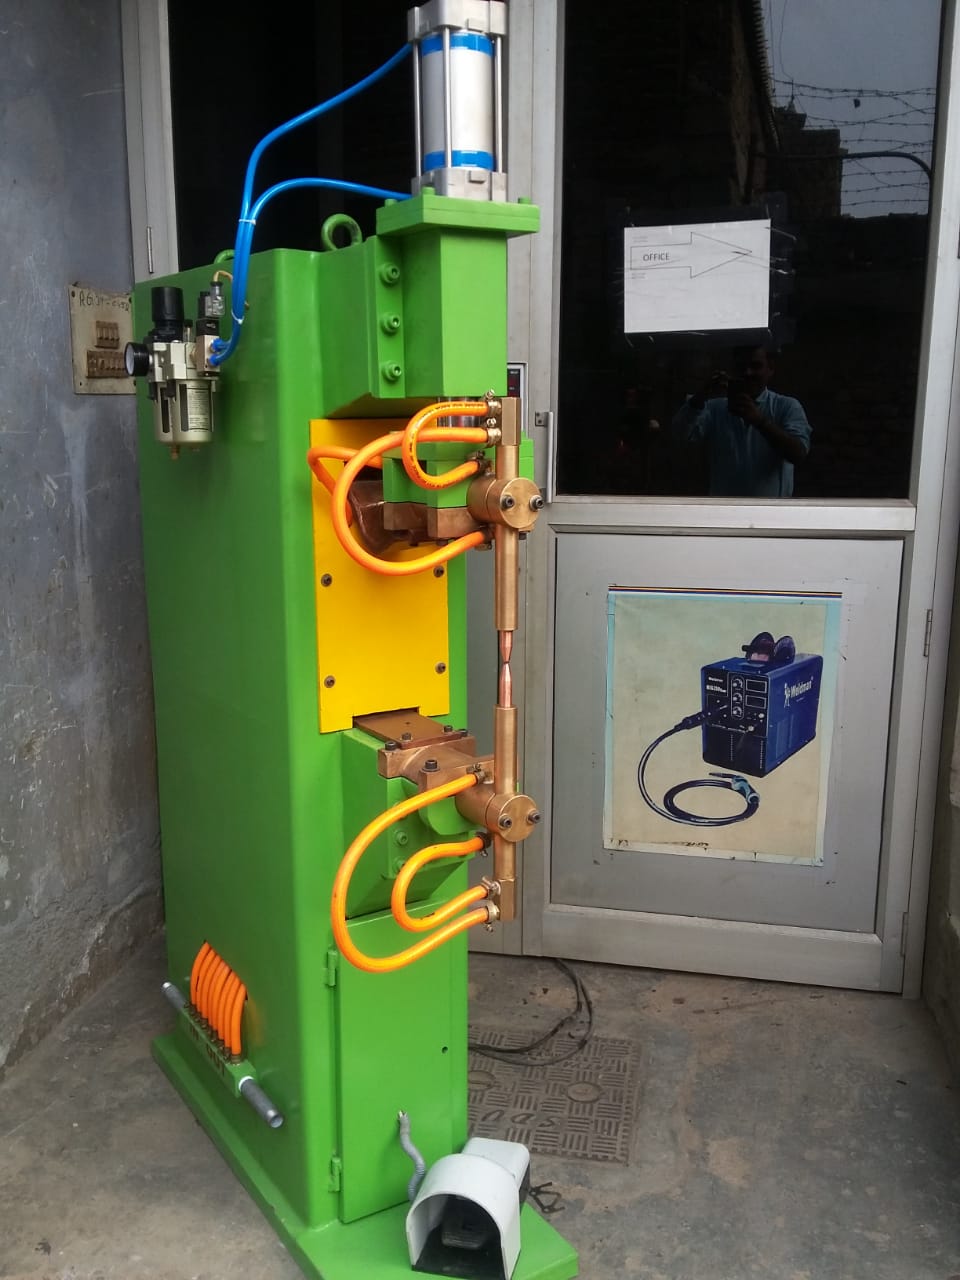 Spot Projection Welding Machine Manufacturer in beed